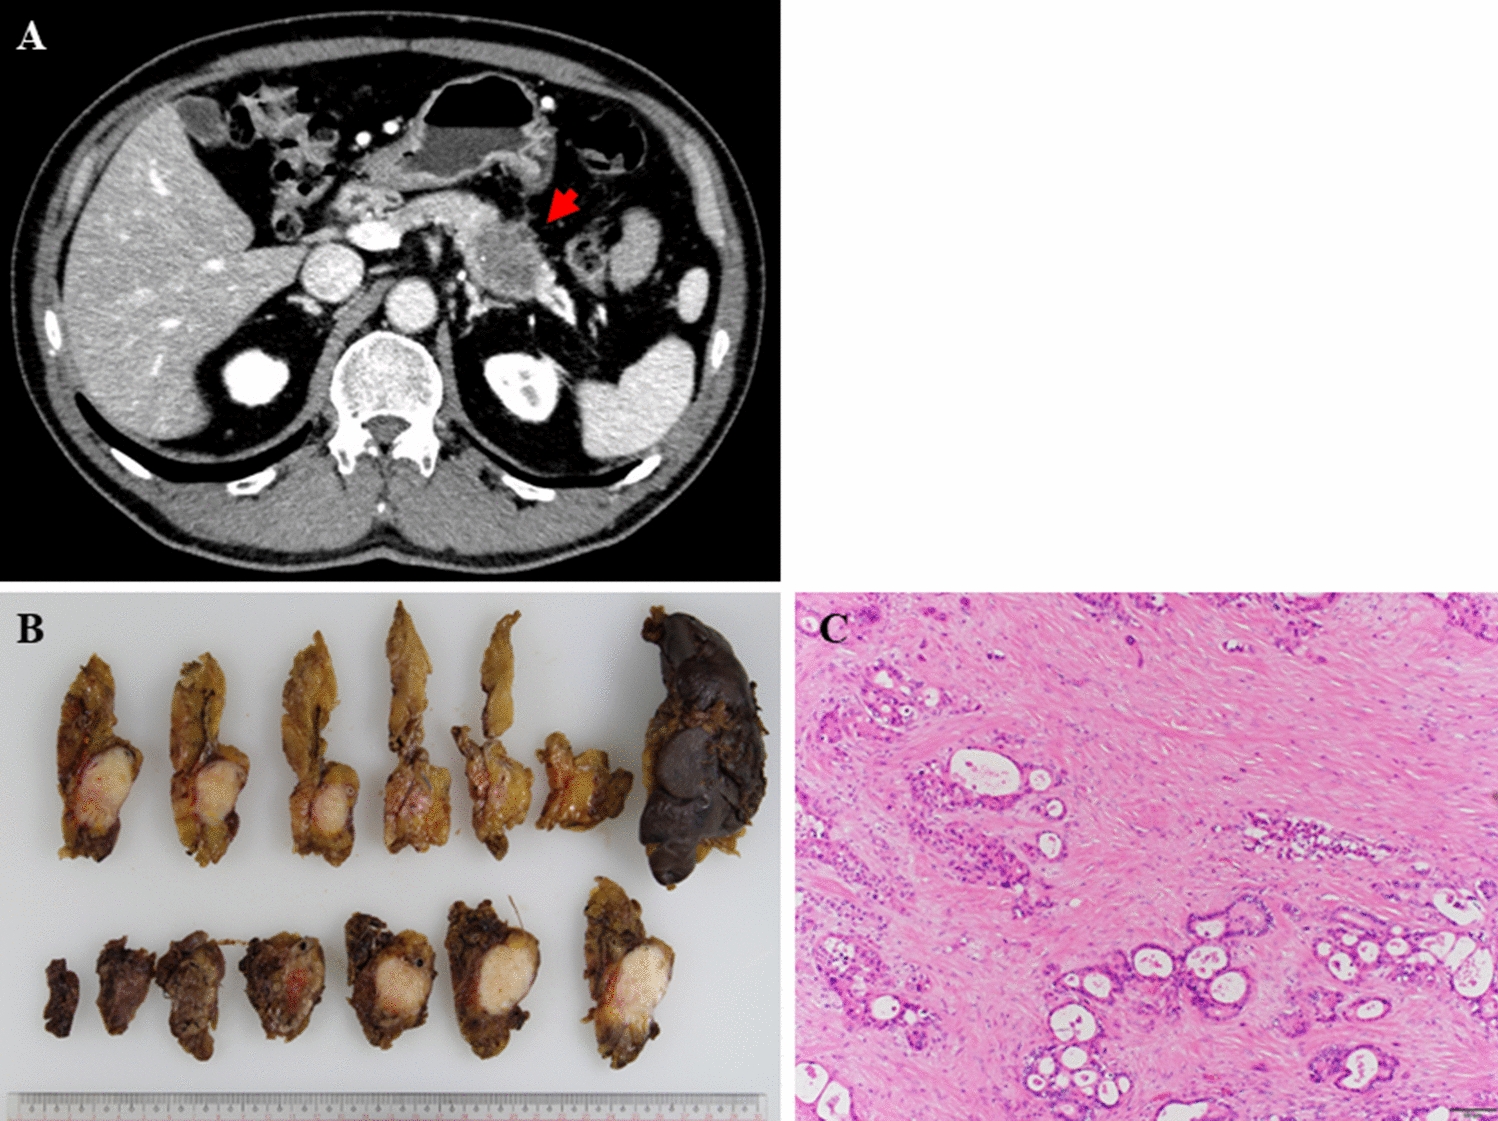 A case of metachronous oligo-hepatic and peritoneal metastases of pancreatic cancer with a favorable outcome after conversion surgery combined with perioperative sequential chemotherapy